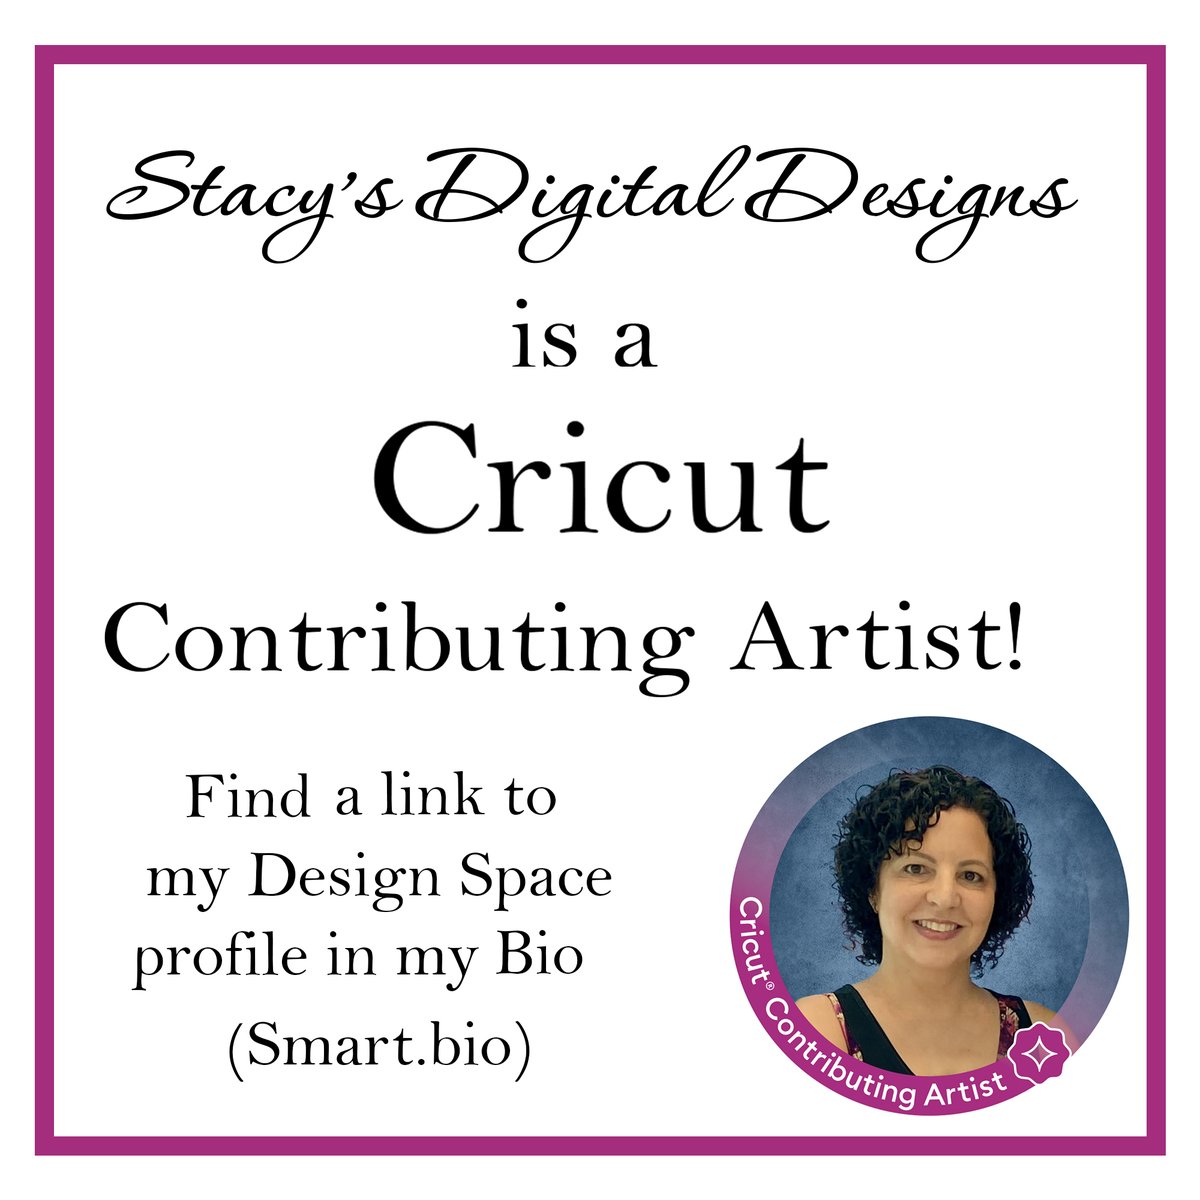 Stacy's Digital Designs is now a Cricut Contributing Artist. Follow me in Design Space - design.cricut.com/landing/profil…

#cricut #cricutsvg #cricutcontributingartist #cricutartist #cricutdesigns #svg #svgfiles #designspace